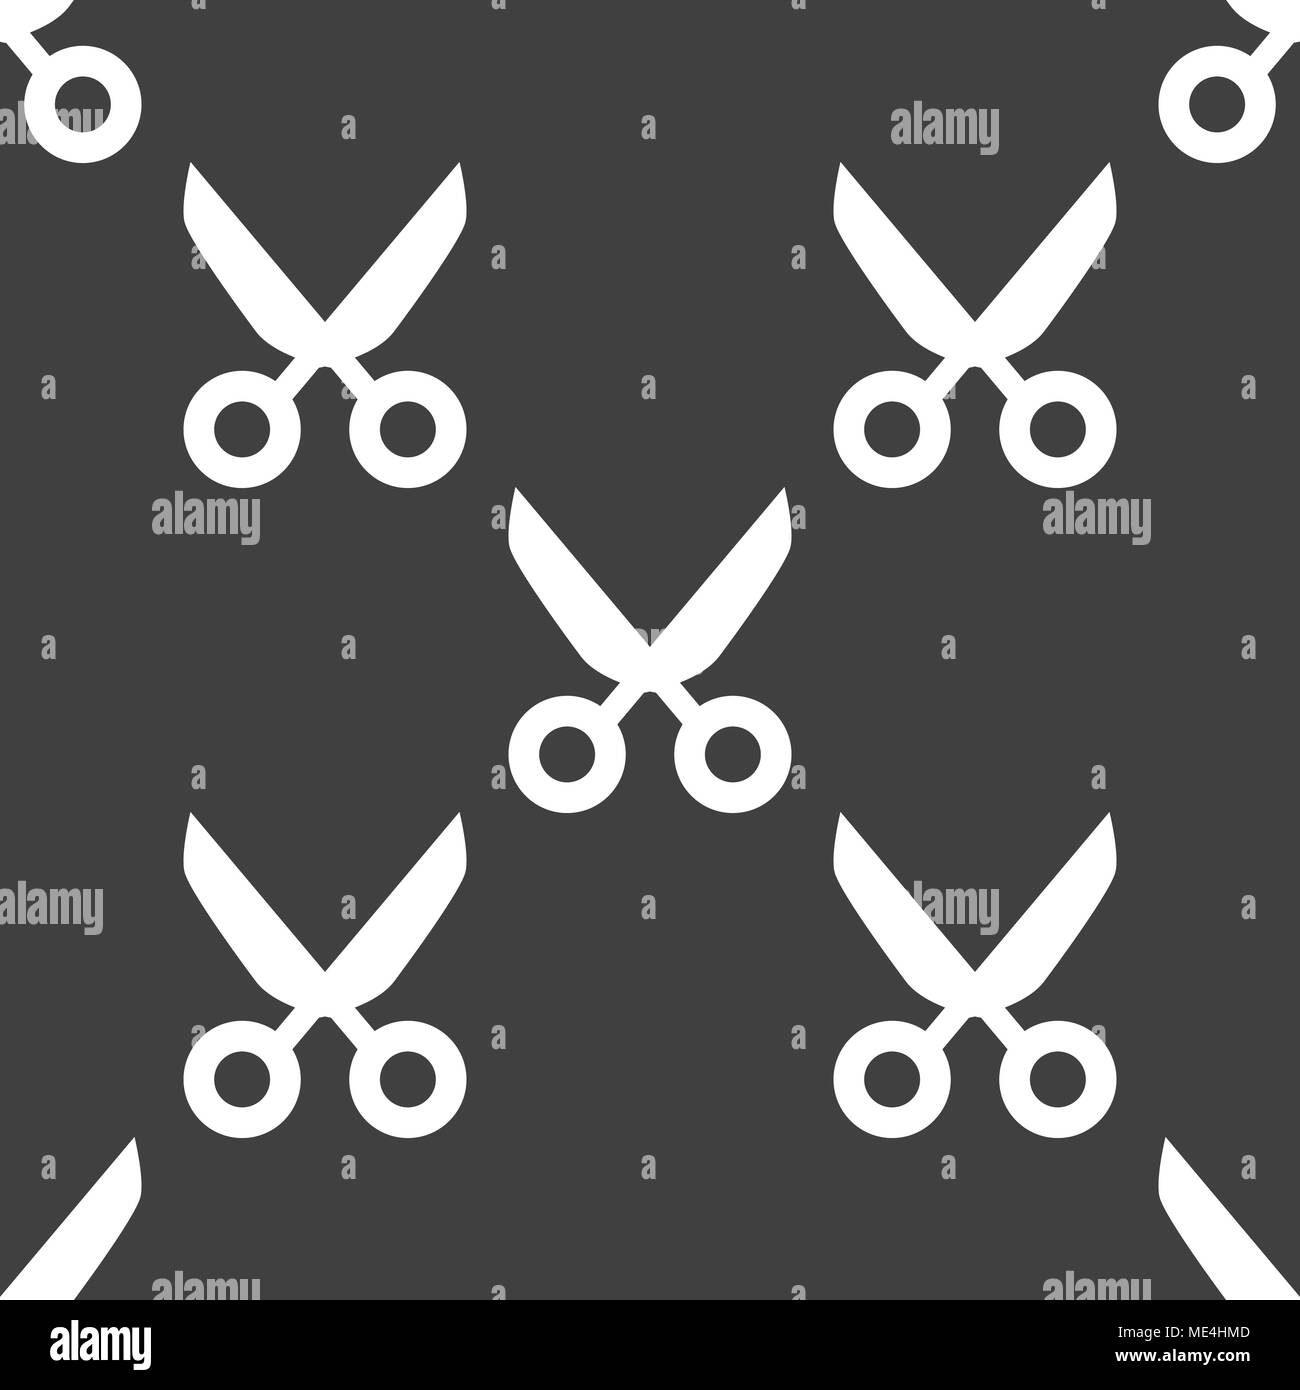 Scissor Icon In Flat Style Vector For Apps Ui Websites Black Icon